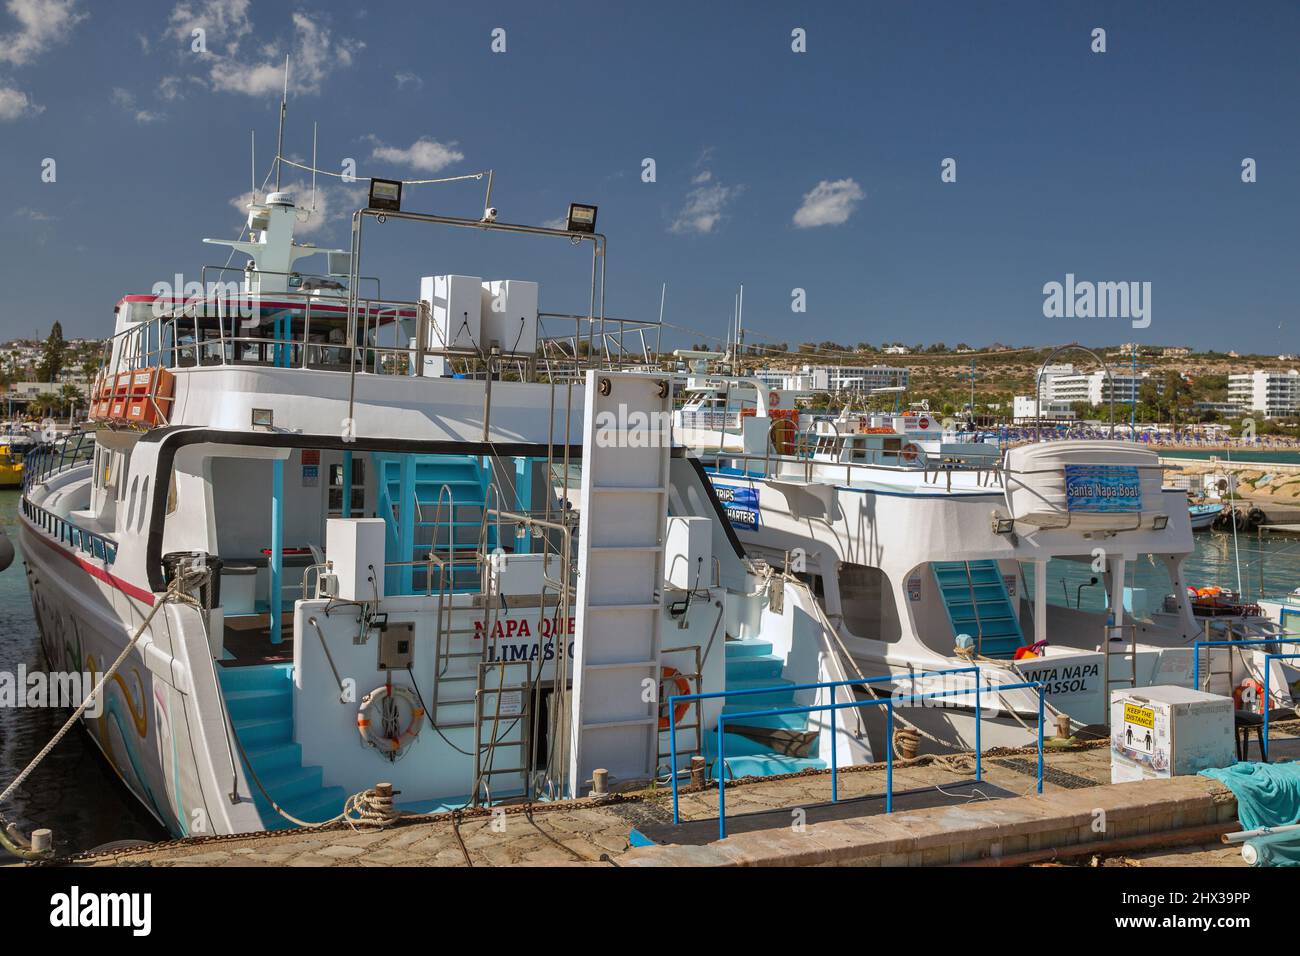 Ayia Napa, Cyprus - May 23, 2021: Pleasure yachts moored in seaport. Ayia Napa is a tourist resort at the far eastern end of the southern coast of Cyp Stock Photo